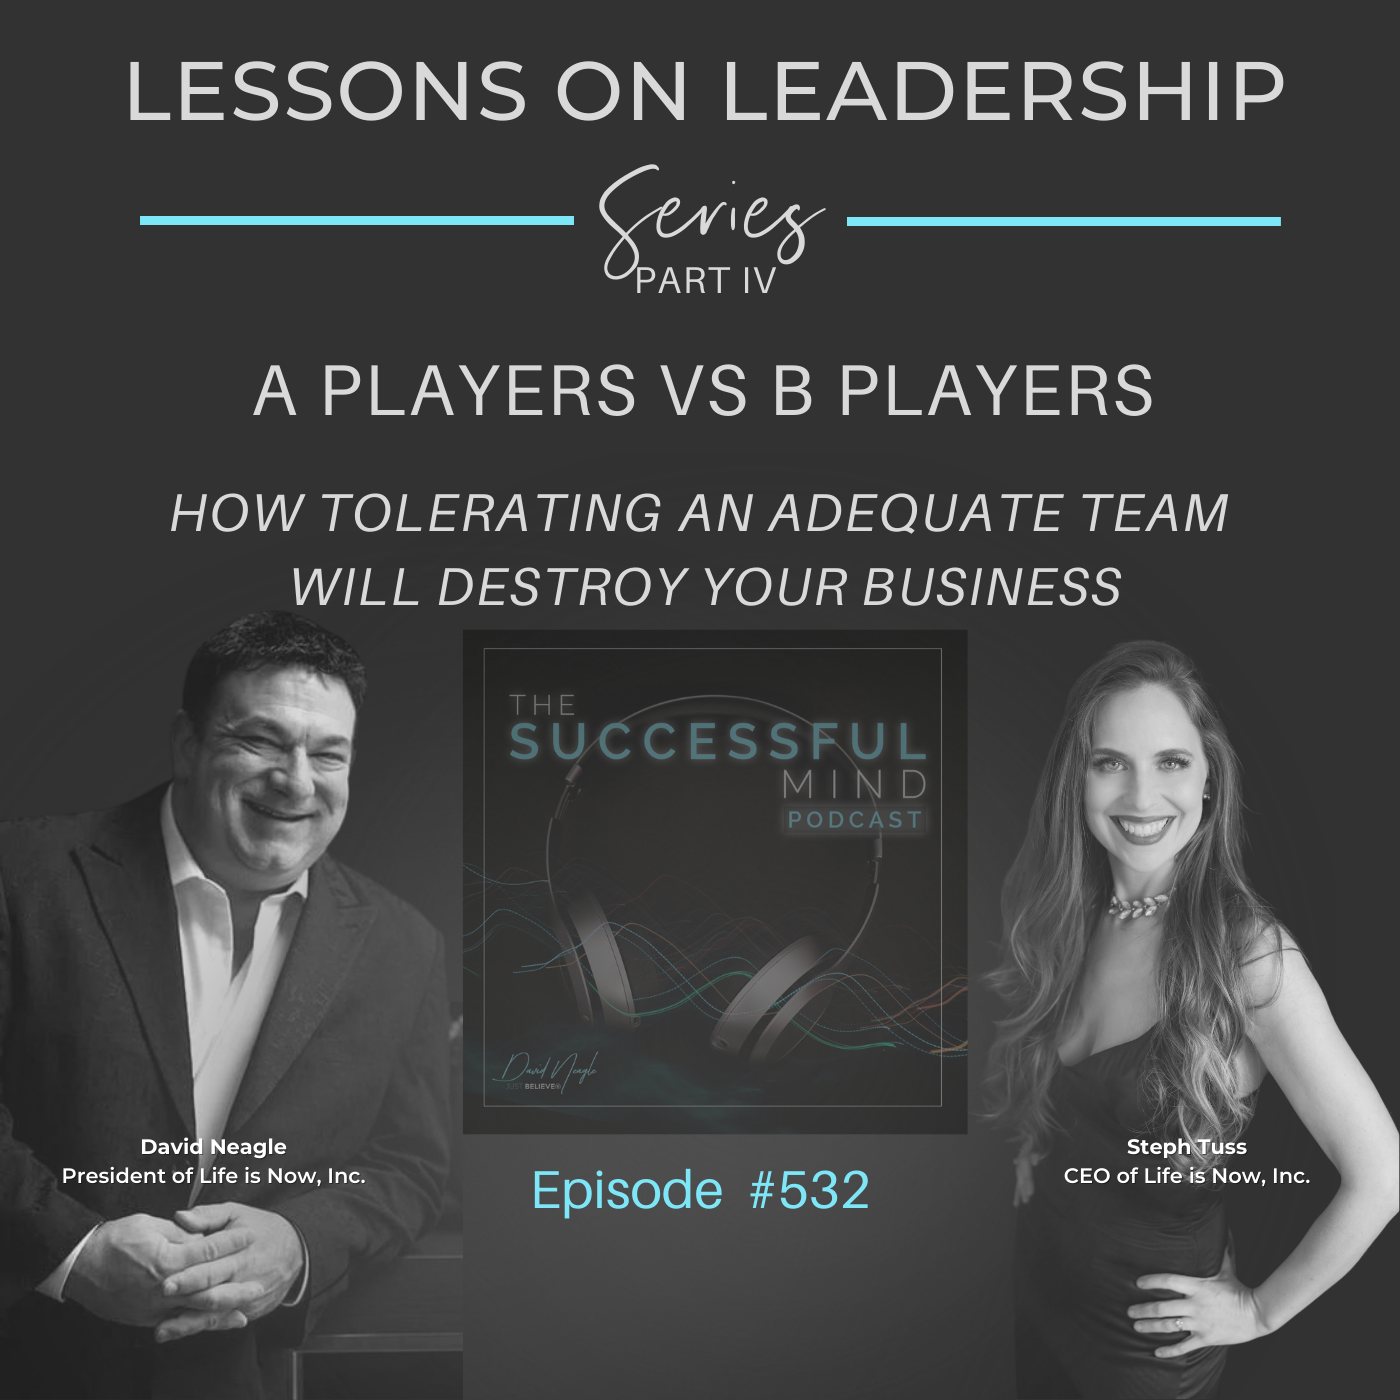 The Successful Mind Podcast – Episode 532 – Lessons on Leadership – Part IV – A Players vs B Players: How Tolerating an Adequate Team Will Destroy Your Business